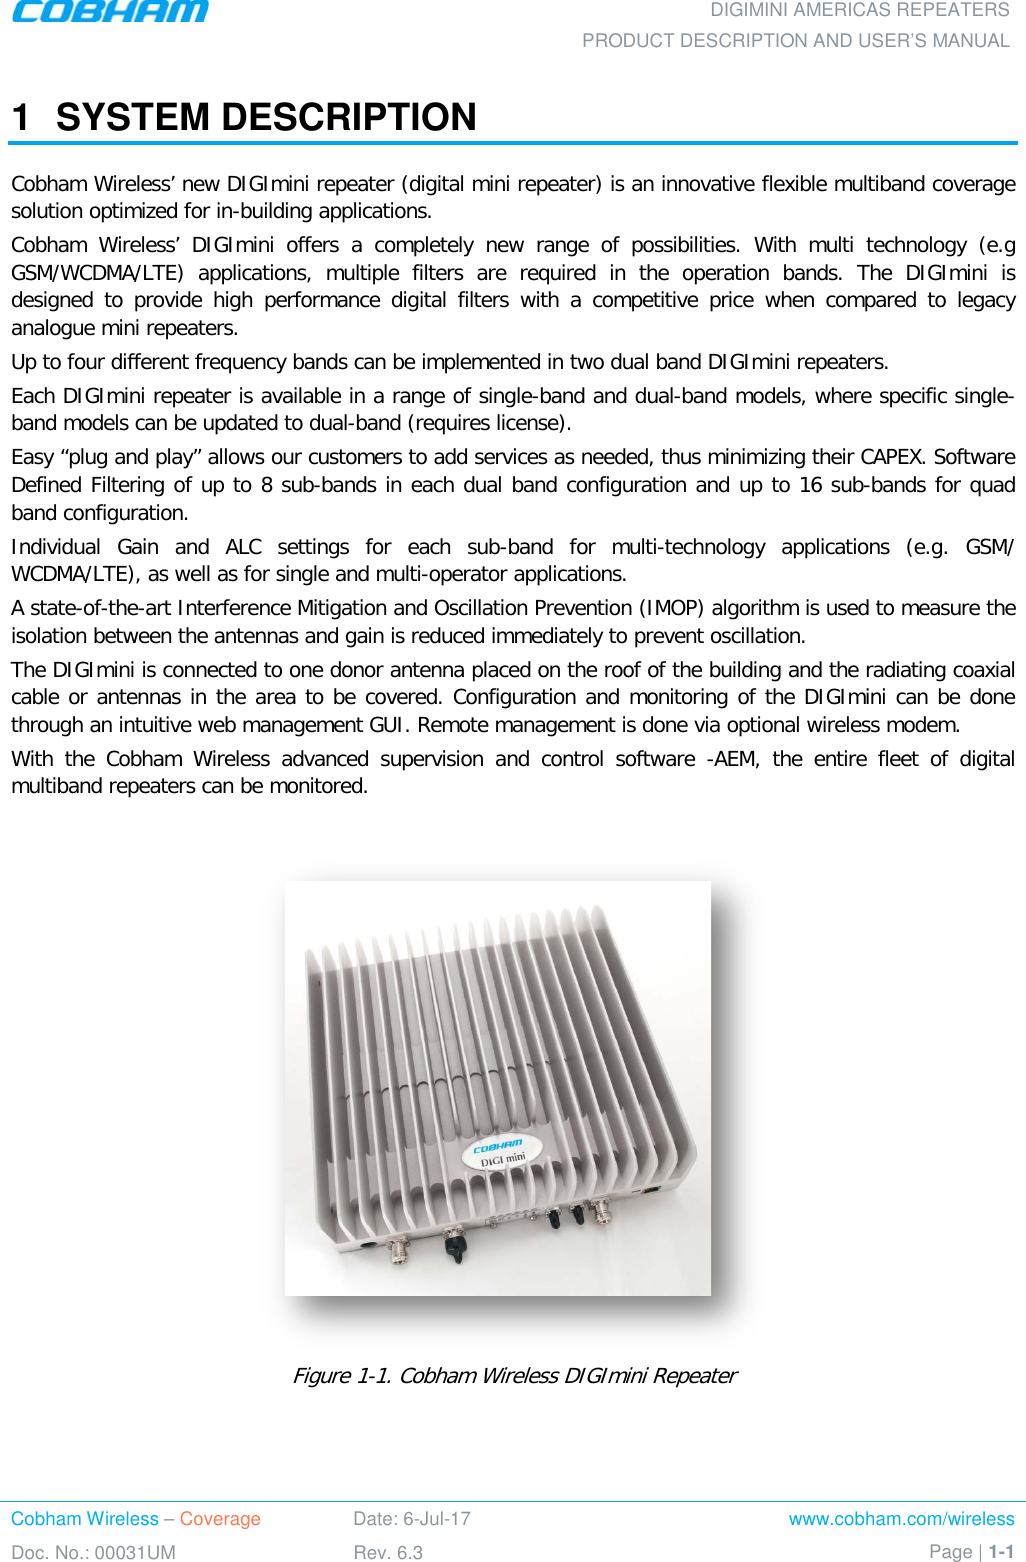 DIGIMINI AMERICAS REPEATERS PRODUCT DESCRIPTION AND USER’S MANUAL Cobham Wireless – Coverage Date: 6-Jul-17 www.cobham.com/wireless Doc. No.: 00031UM Rev. 6.3 Page | 1-1  1  SYSTEM DESCRIPTION Cobham Wireless’ new DIGImini repeater (digital mini repeater) is an innovative flexible multiband coverage solution optimized for in-building applications. Cobham Wireless’ DIGImini offers a completely new range of possibilities. With multi technology (e.g GSM/WCDMA/LTE) applications, multiple filters are required in the operation bands. The DIGImini is designed to provide high performance digital filters with a competitive price when compared to legacy analogue mini repeaters. Up to four different frequency bands can be implemented in two dual band DIGImini repeaters.  Each DIGImini repeater is available in a range of single-band and dual-band models, where specific single-band models can be updated to dual-band (requires license). Easy “plug and play” allows our customers to add services as needed, thus minimizing their CAPEX. Software Defined Filtering of up to 8 sub-bands in each dual band configuration and up to 16 sub-bands for quad band configuration. Individual Gain and ALC settings for each sub-band for multi-technology applications (e.g.  GSM/ WCDMA/LTE), as well as for single and multi-operator applications.  A state-of-the-art Interference Mitigation and Oscillation Prevention (IMOP) algorithm is used to measure the isolation between the antennas and gain is reduced immediately to prevent oscillation. The DIGImini is connected to one donor antenna placed on the roof of the building and the radiating coaxial cable or antennas in the area to be covered. Configuration and monitoring of the DIGImini can be done through an intuitive web management GUI. Remote management is done via optional wireless modem. With the Cobham Wireless advanced supervision and control software  -AEM, the entire fleet of digital multiband repeaters can be monitored.     Figure  1-1. Cobham Wireless DIGImini Repeater 